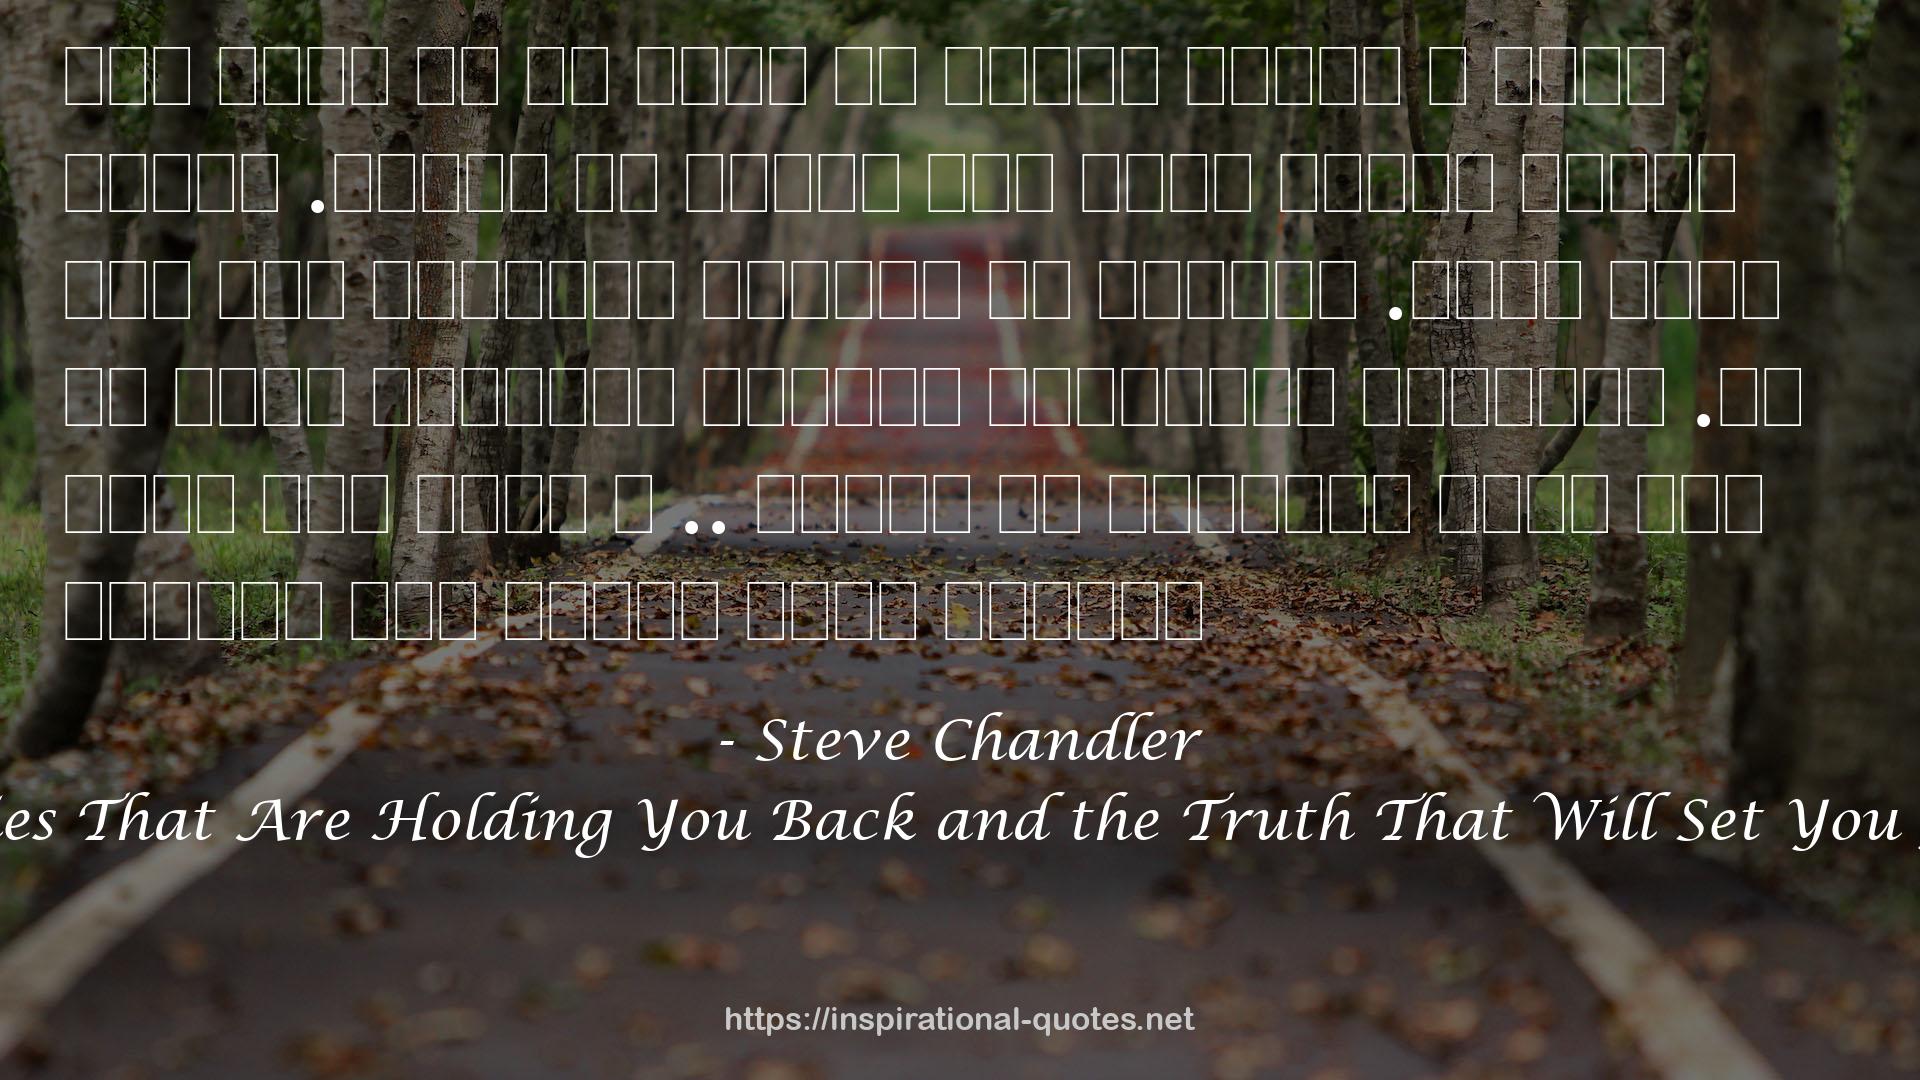 17 Lies That Are Holding You Back and the Truth That Will Set You Free QUOTES